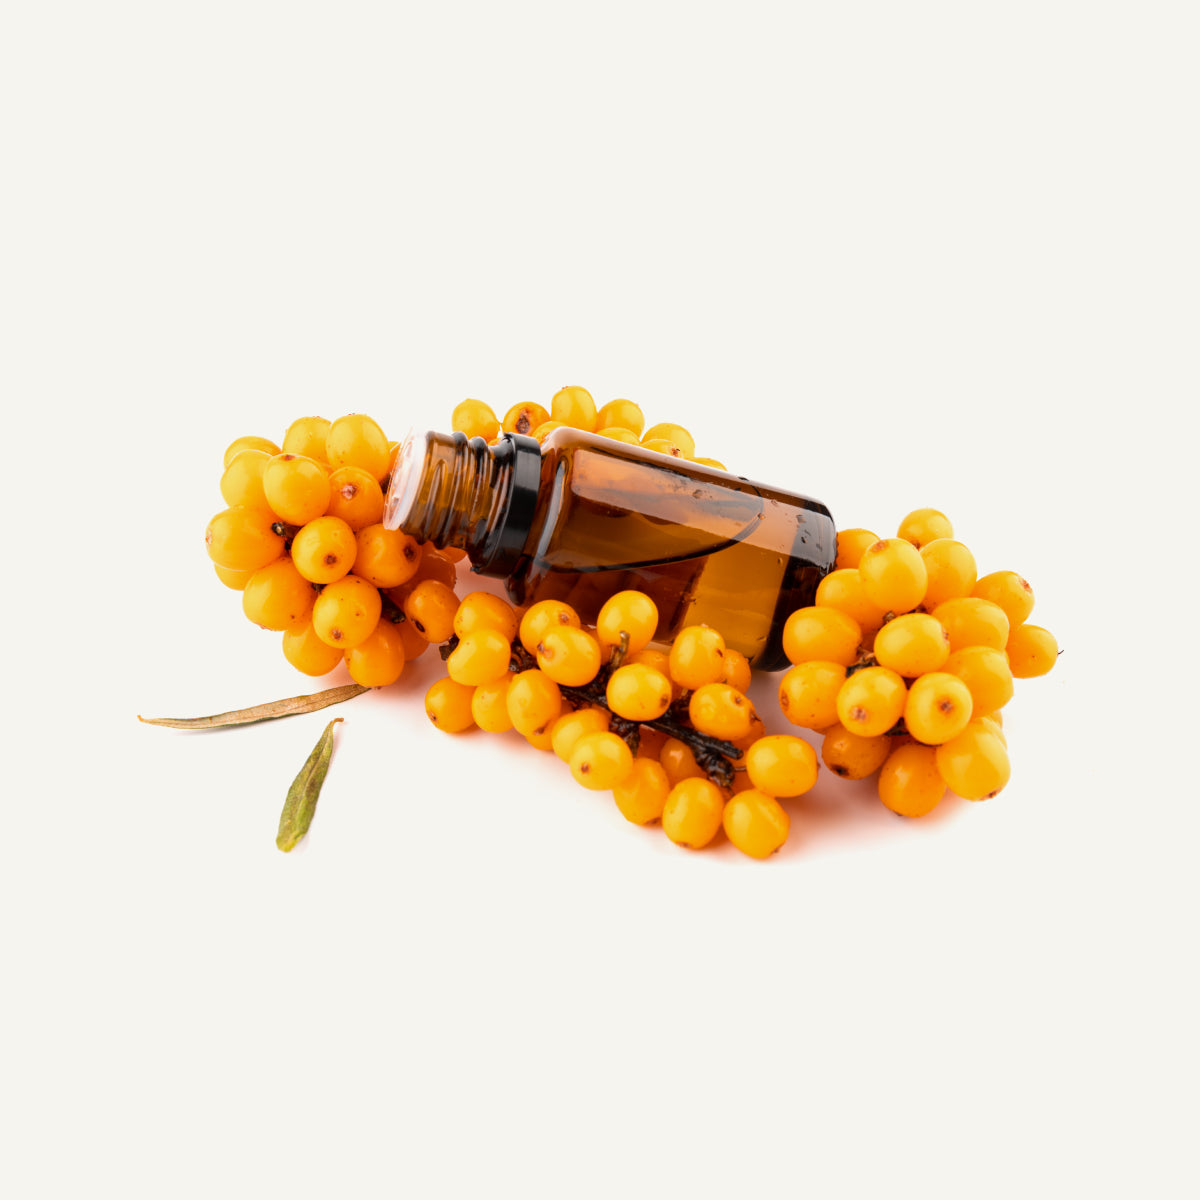 Herbal Oil Extracts Traditionally Used in Herbal Medicines and Skin Treatments